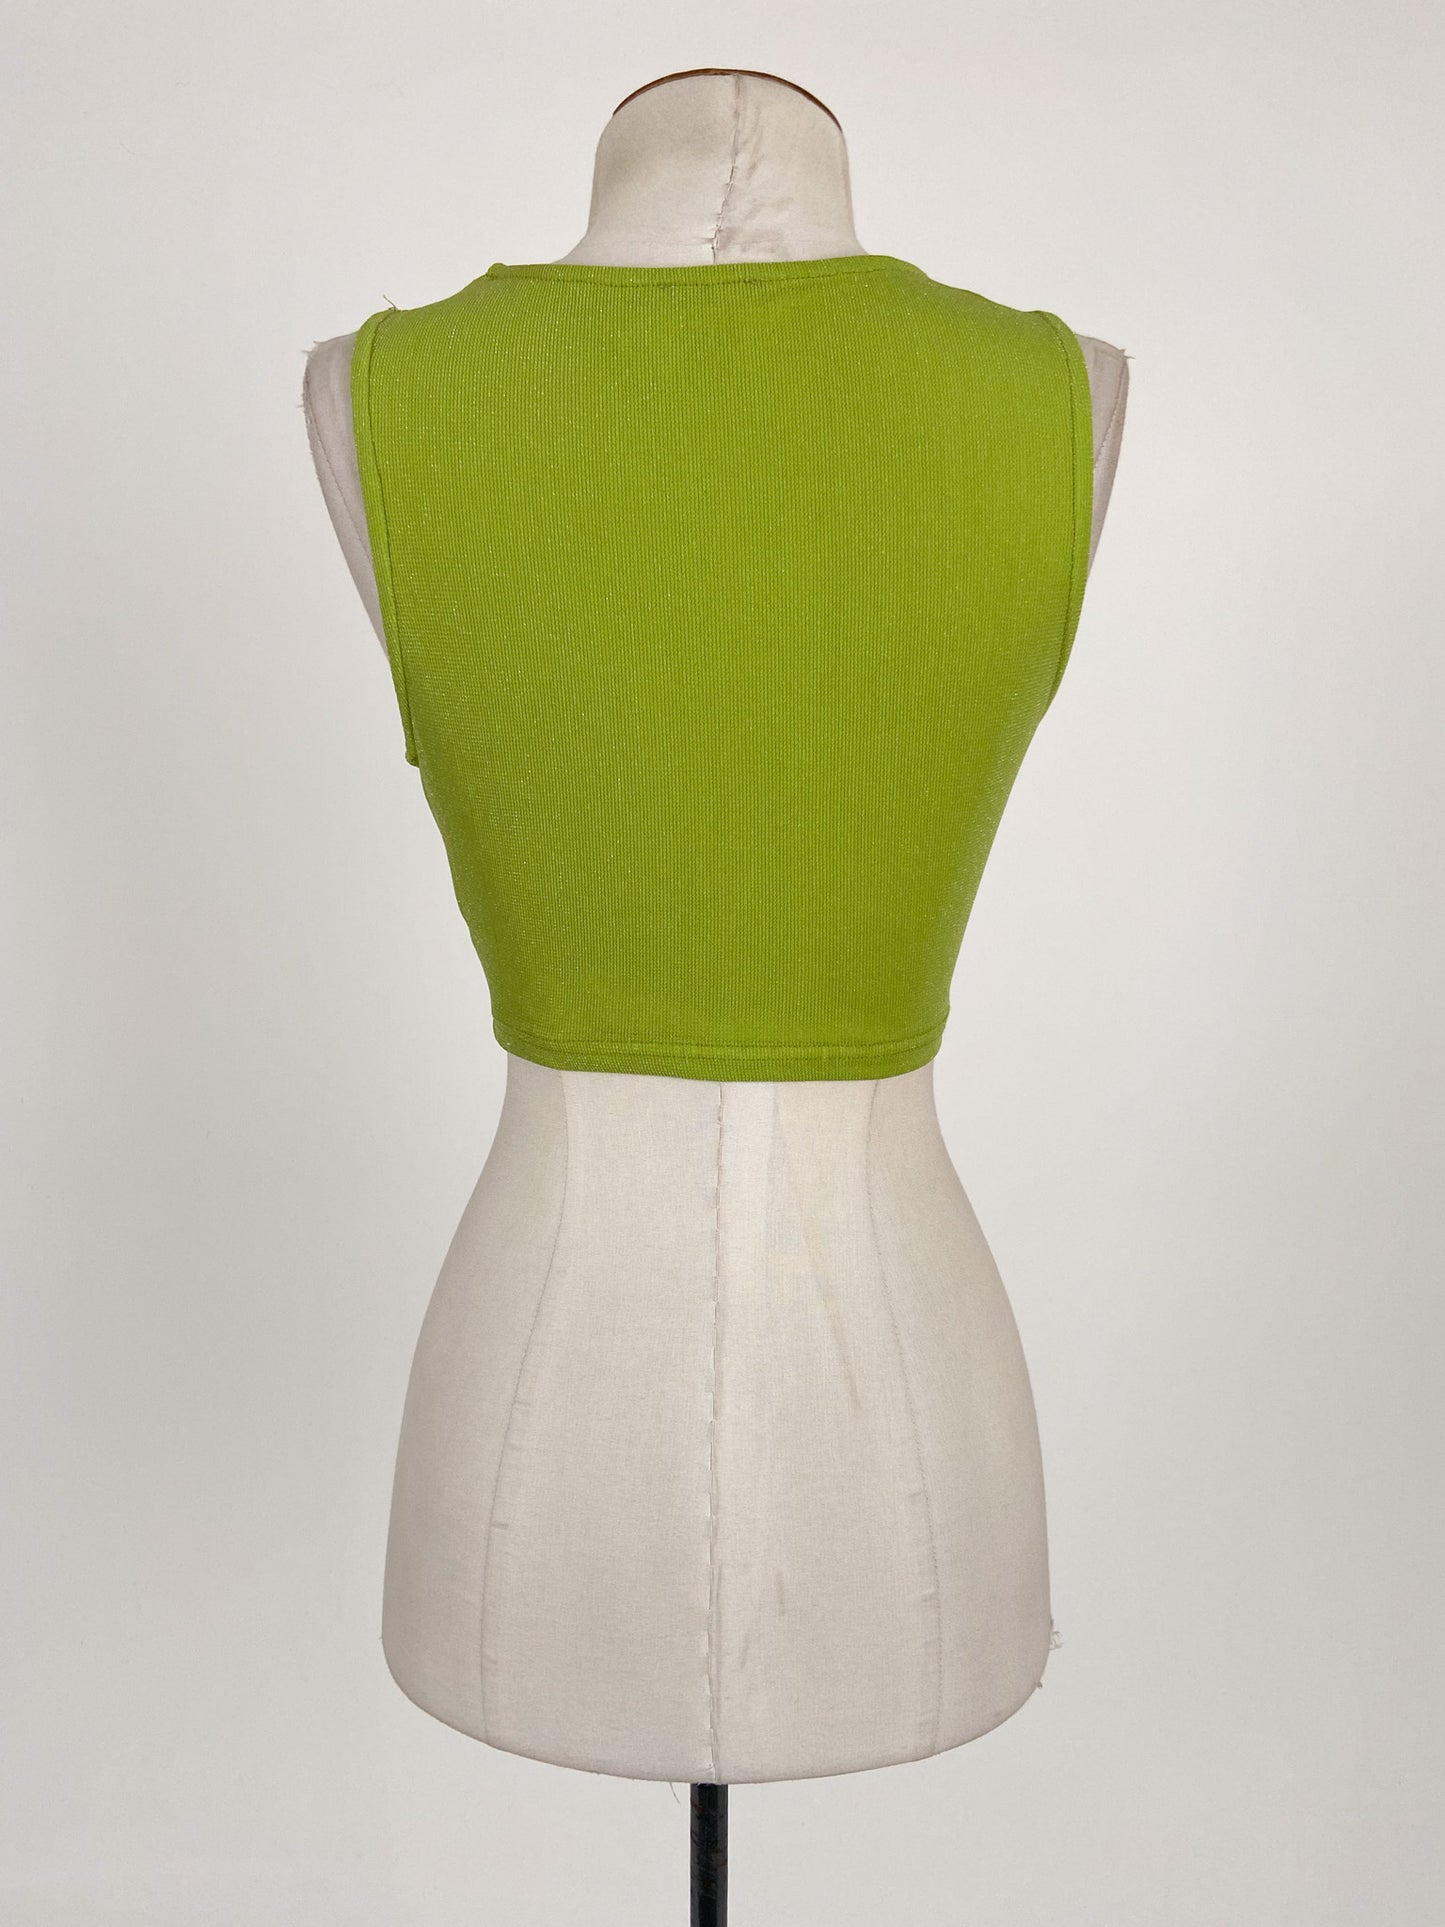 Princess Polly | Green Cocktail Top | Size 8